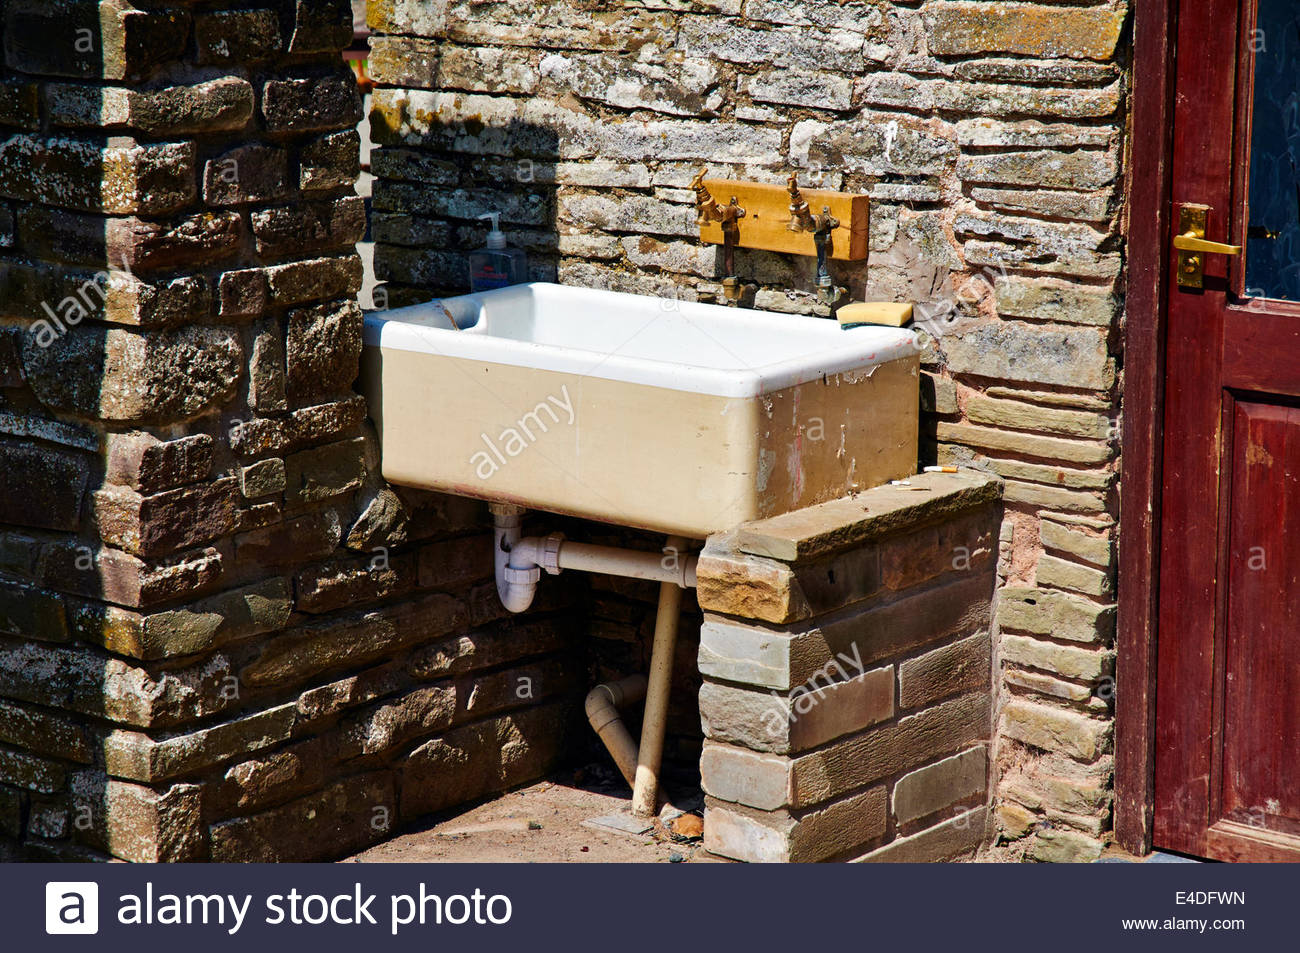 A Belfast Sink Outside A Stone Building On A Camping Site